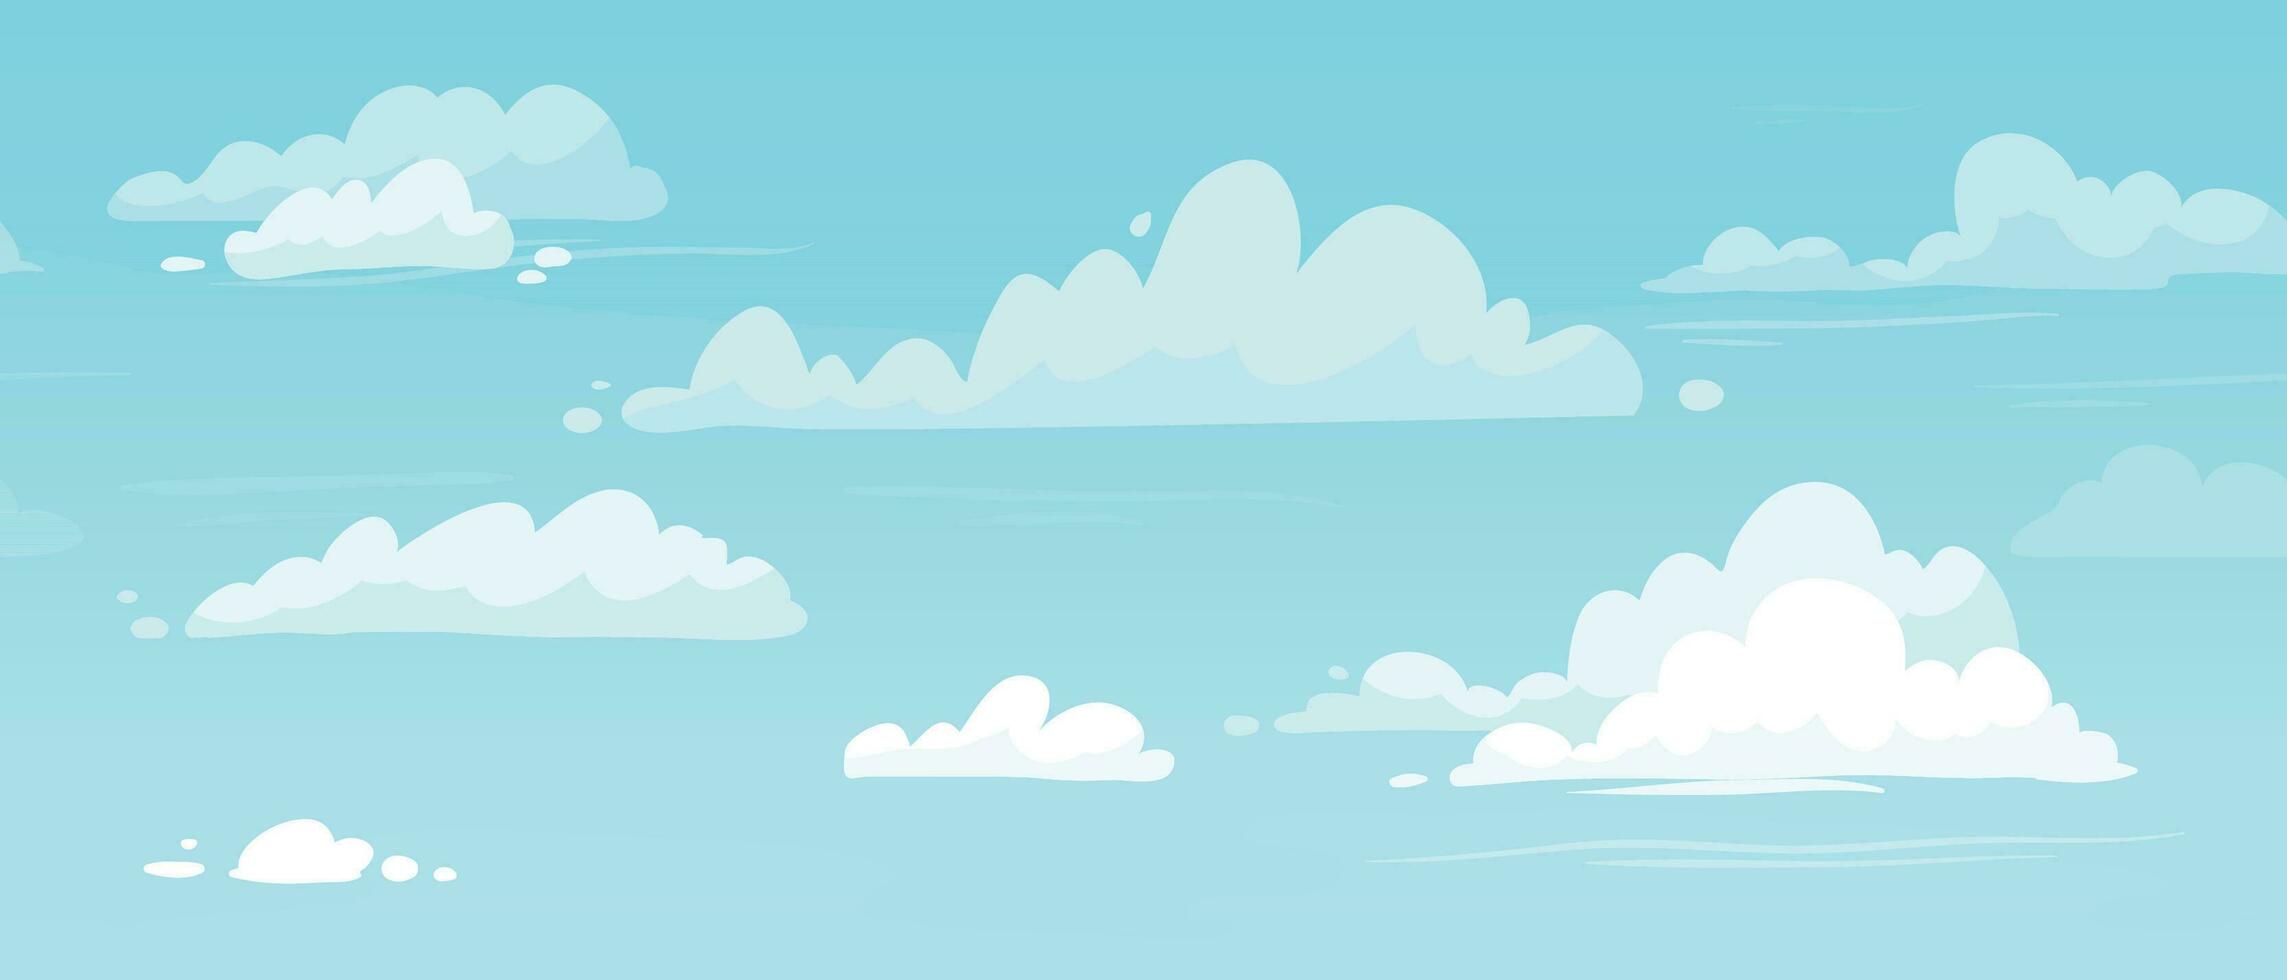 Cartoon cloudy skies. Puffy clouds in blue sky seamless vector background illustration